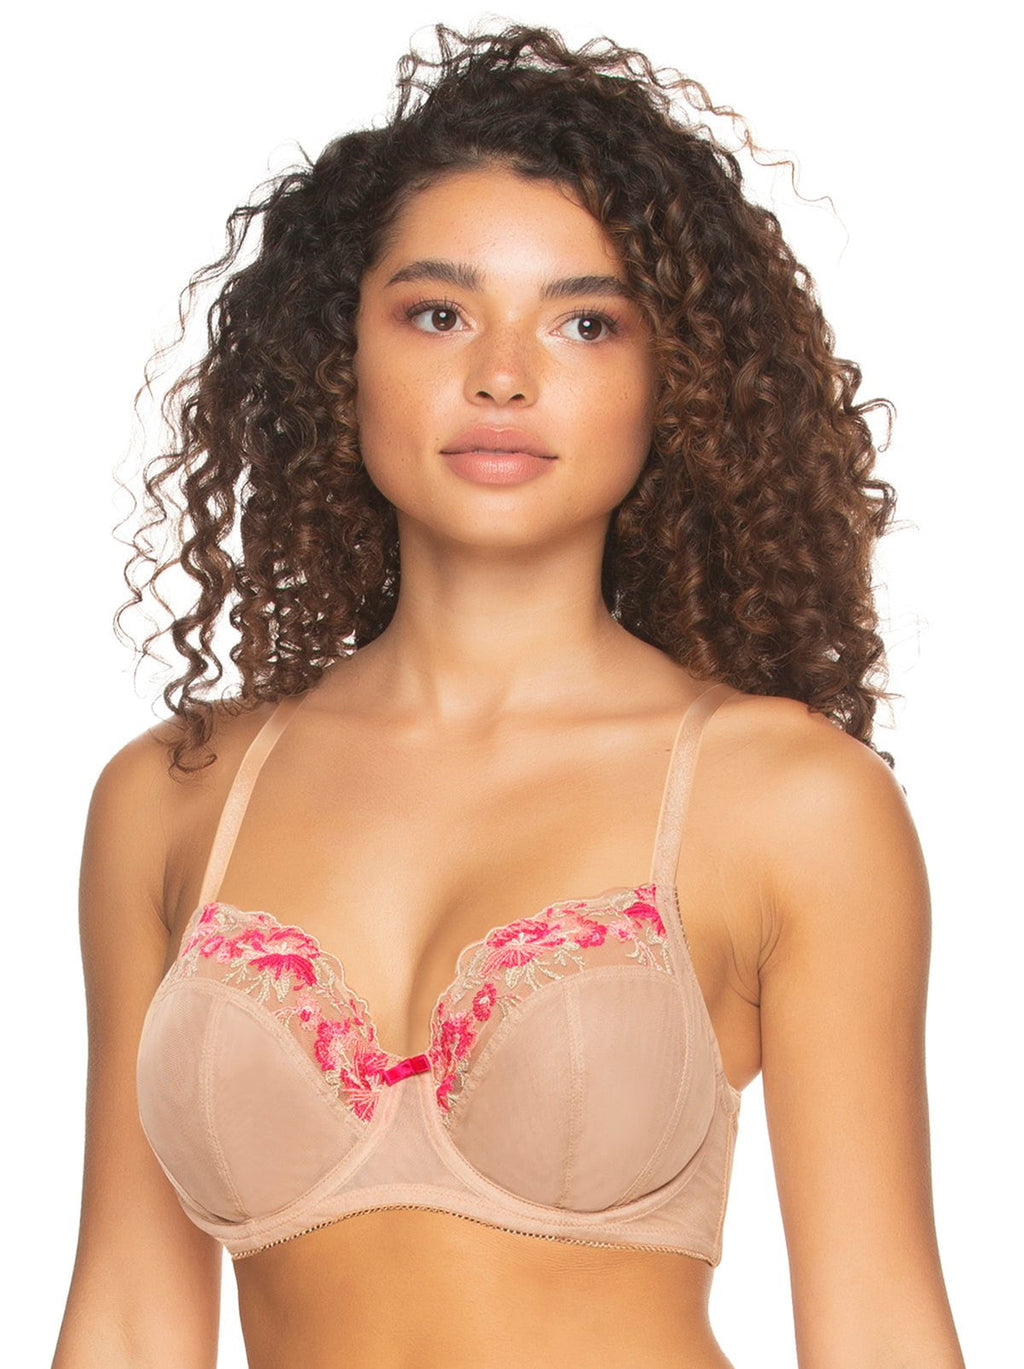 Paramour 115063 Unlined Underwire Lace Bra Size 42DD #C2412 - Helia Beer Co